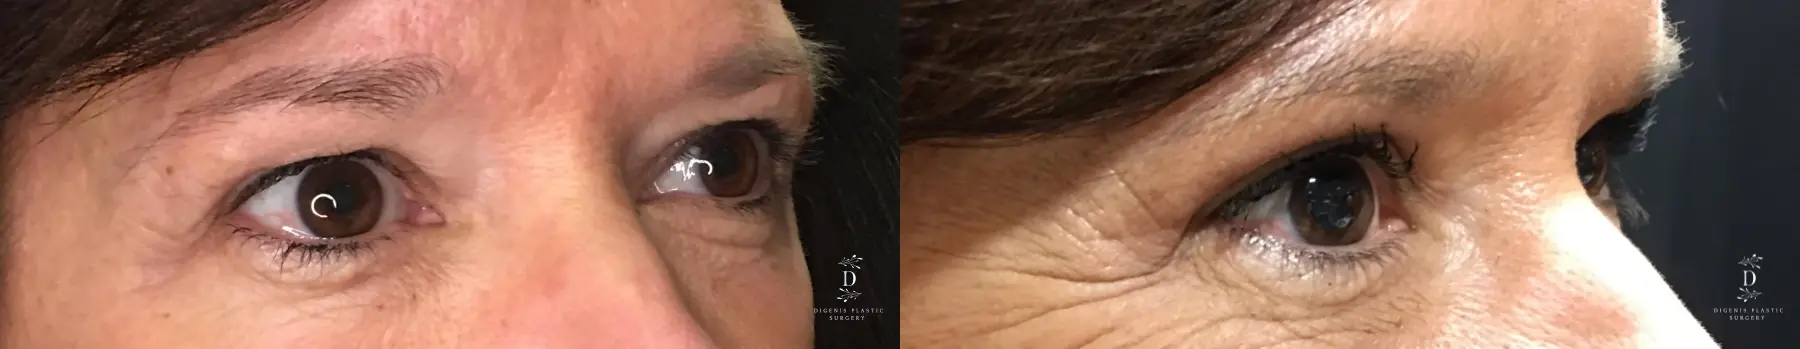 Eyelid Surgery: Patient 27 - Before and After 2